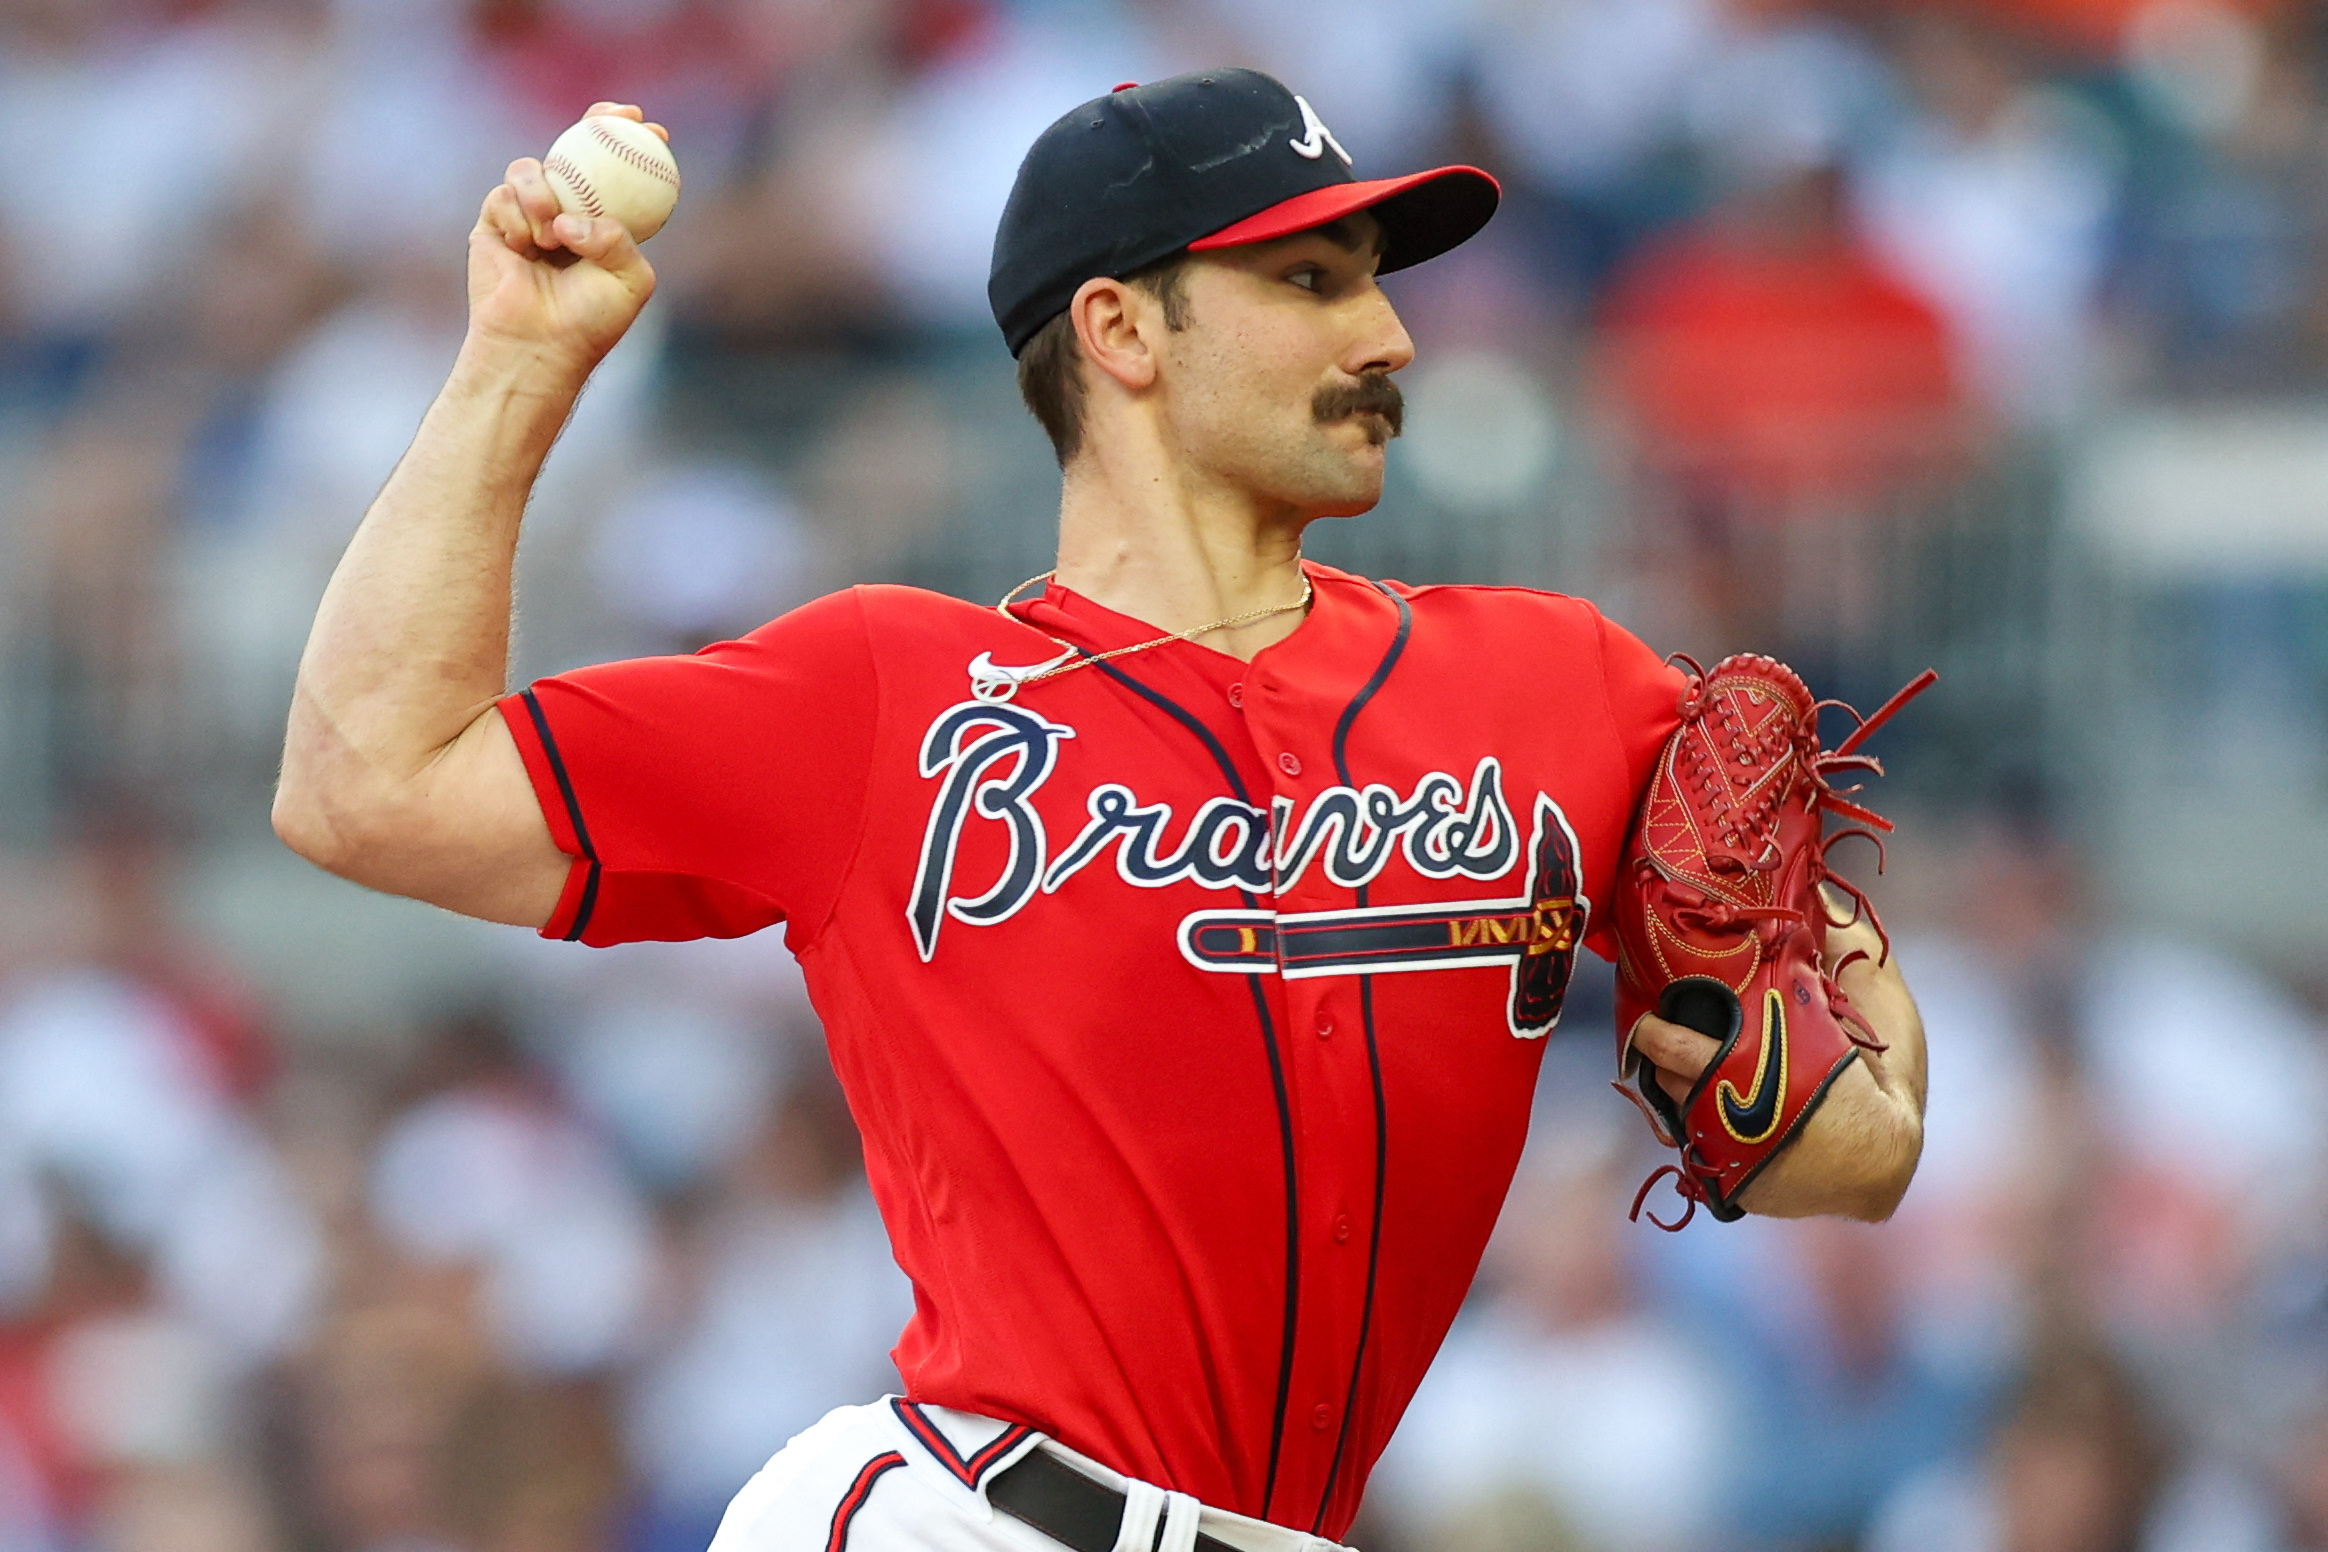 Strider strikes out 10 as Braves blank Giants for 3rd straight shutout